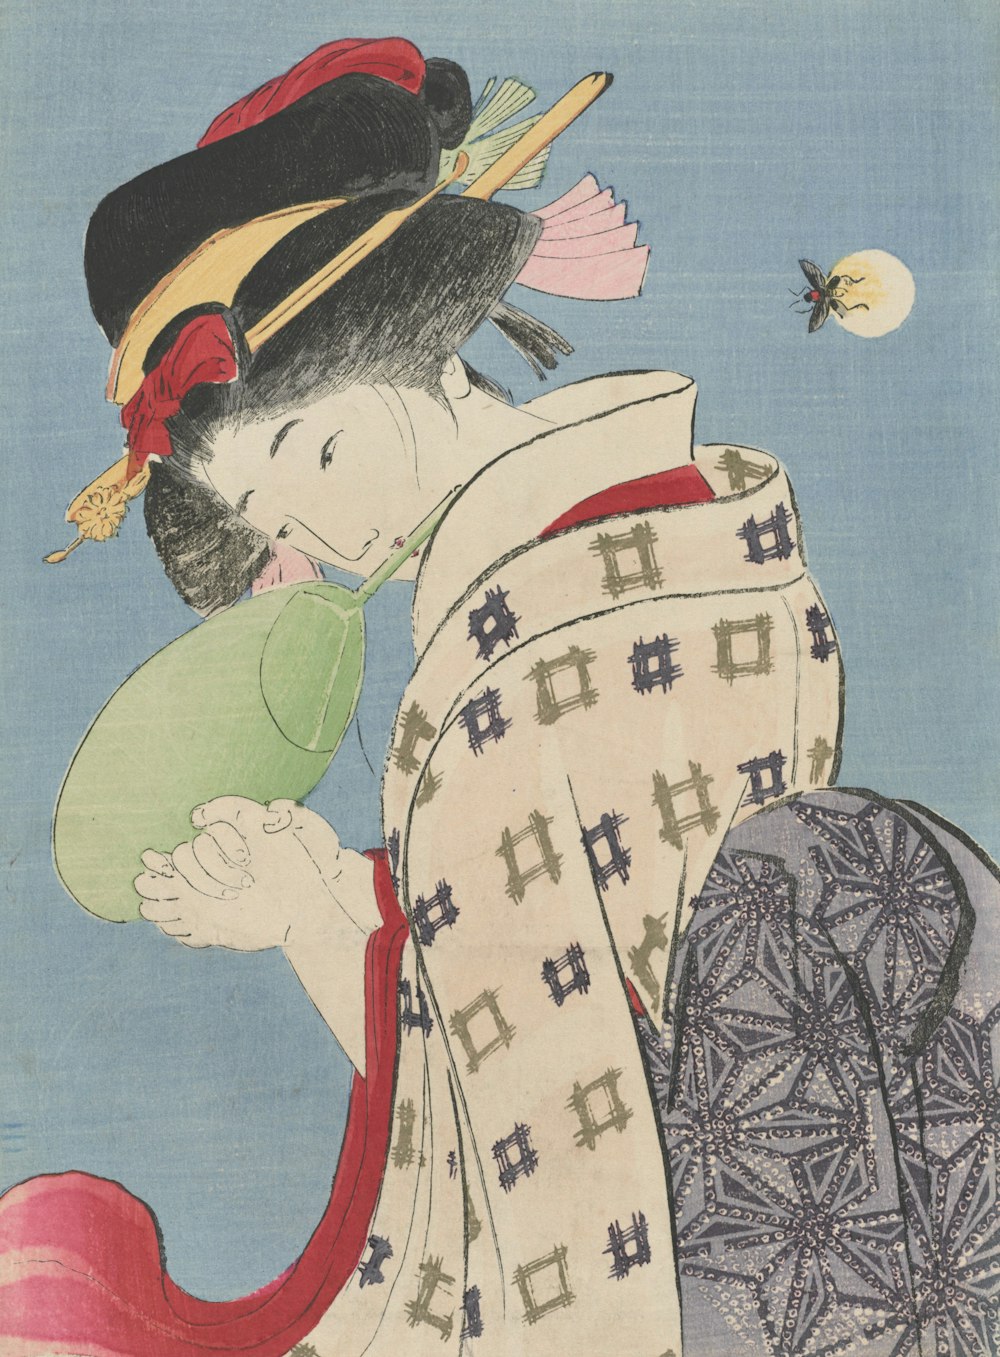 a painting of a woman in a kimono